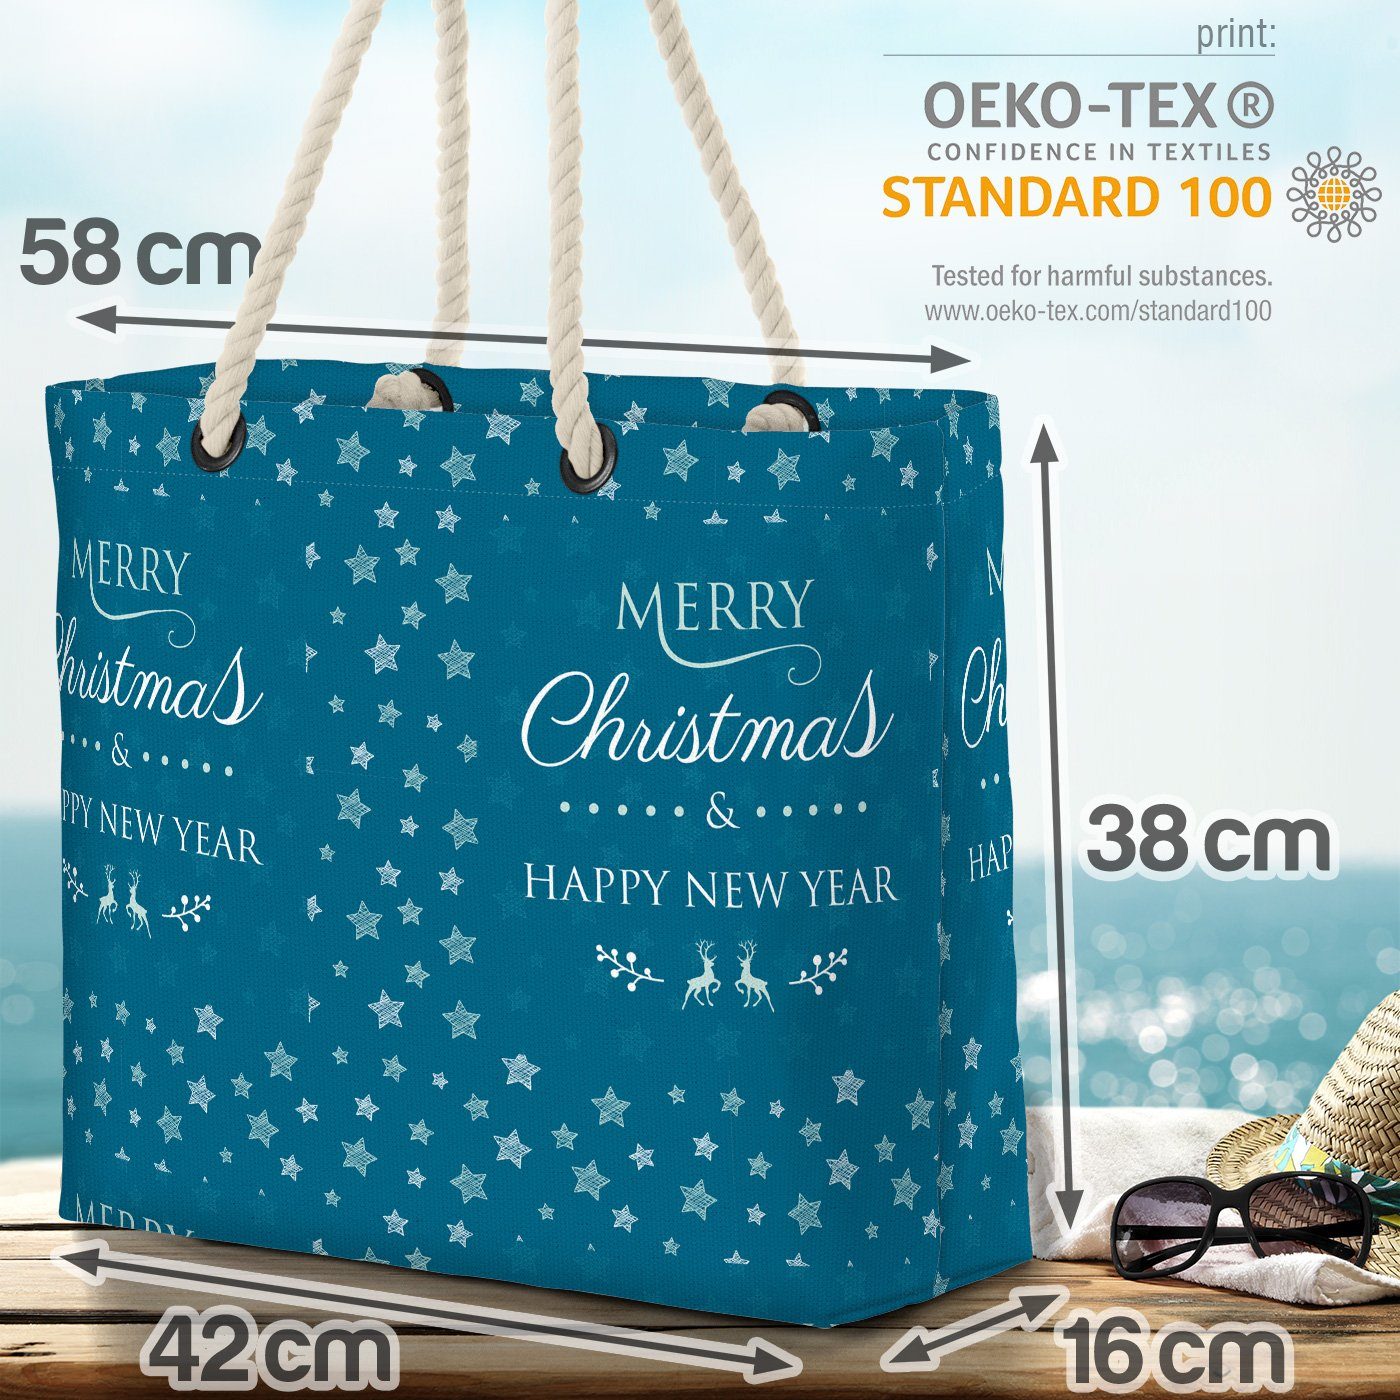 VOID Strandtasche Beach Year Happy New Christmas (1-tlg), Silvester Bag Christmas New Weihnacht Year Merry